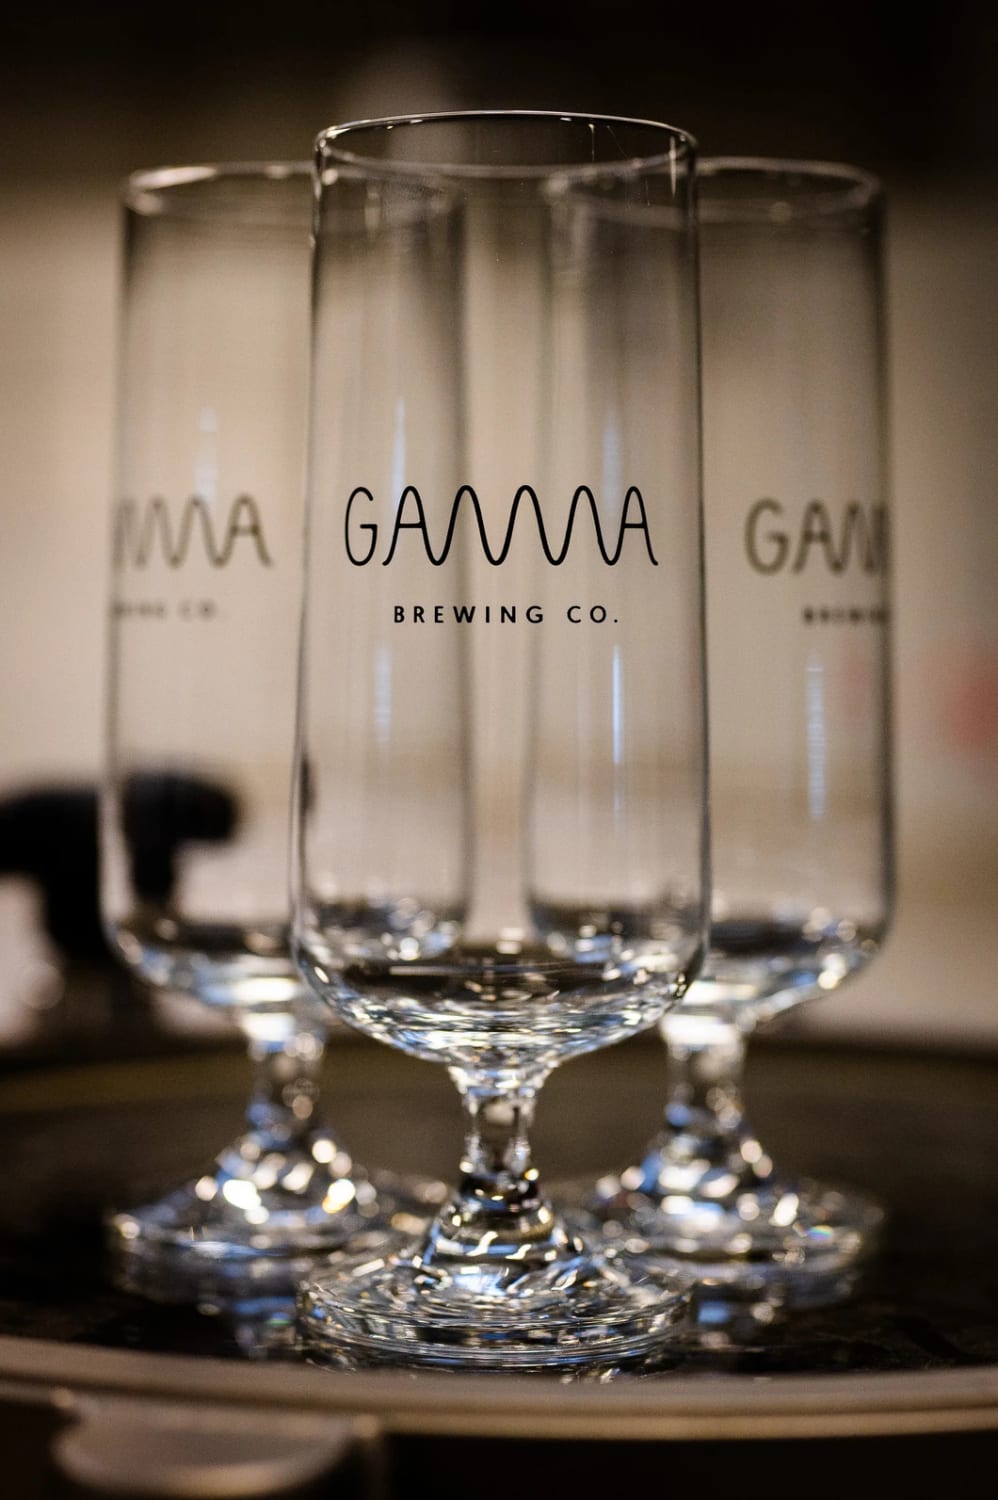 This Danish brewery is called Gamma, and its logo resembles a (gamma?) wave